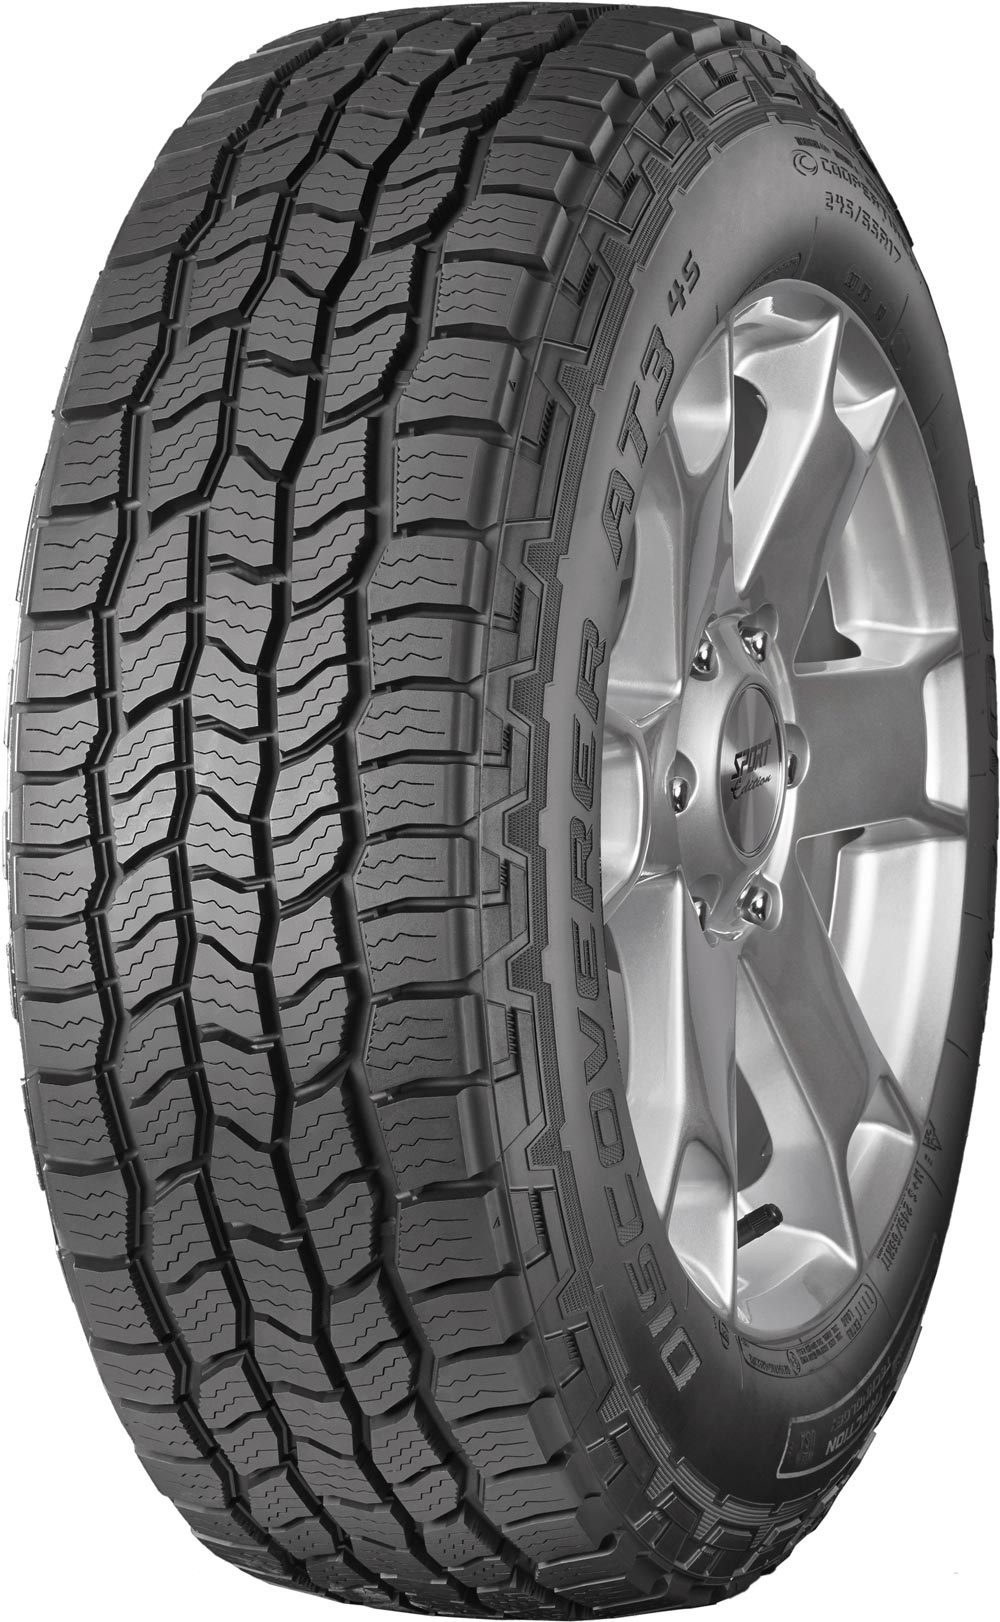 Джипови гуми COOPER DISCOVERER AT3 4S XL 235/75 R16 108T